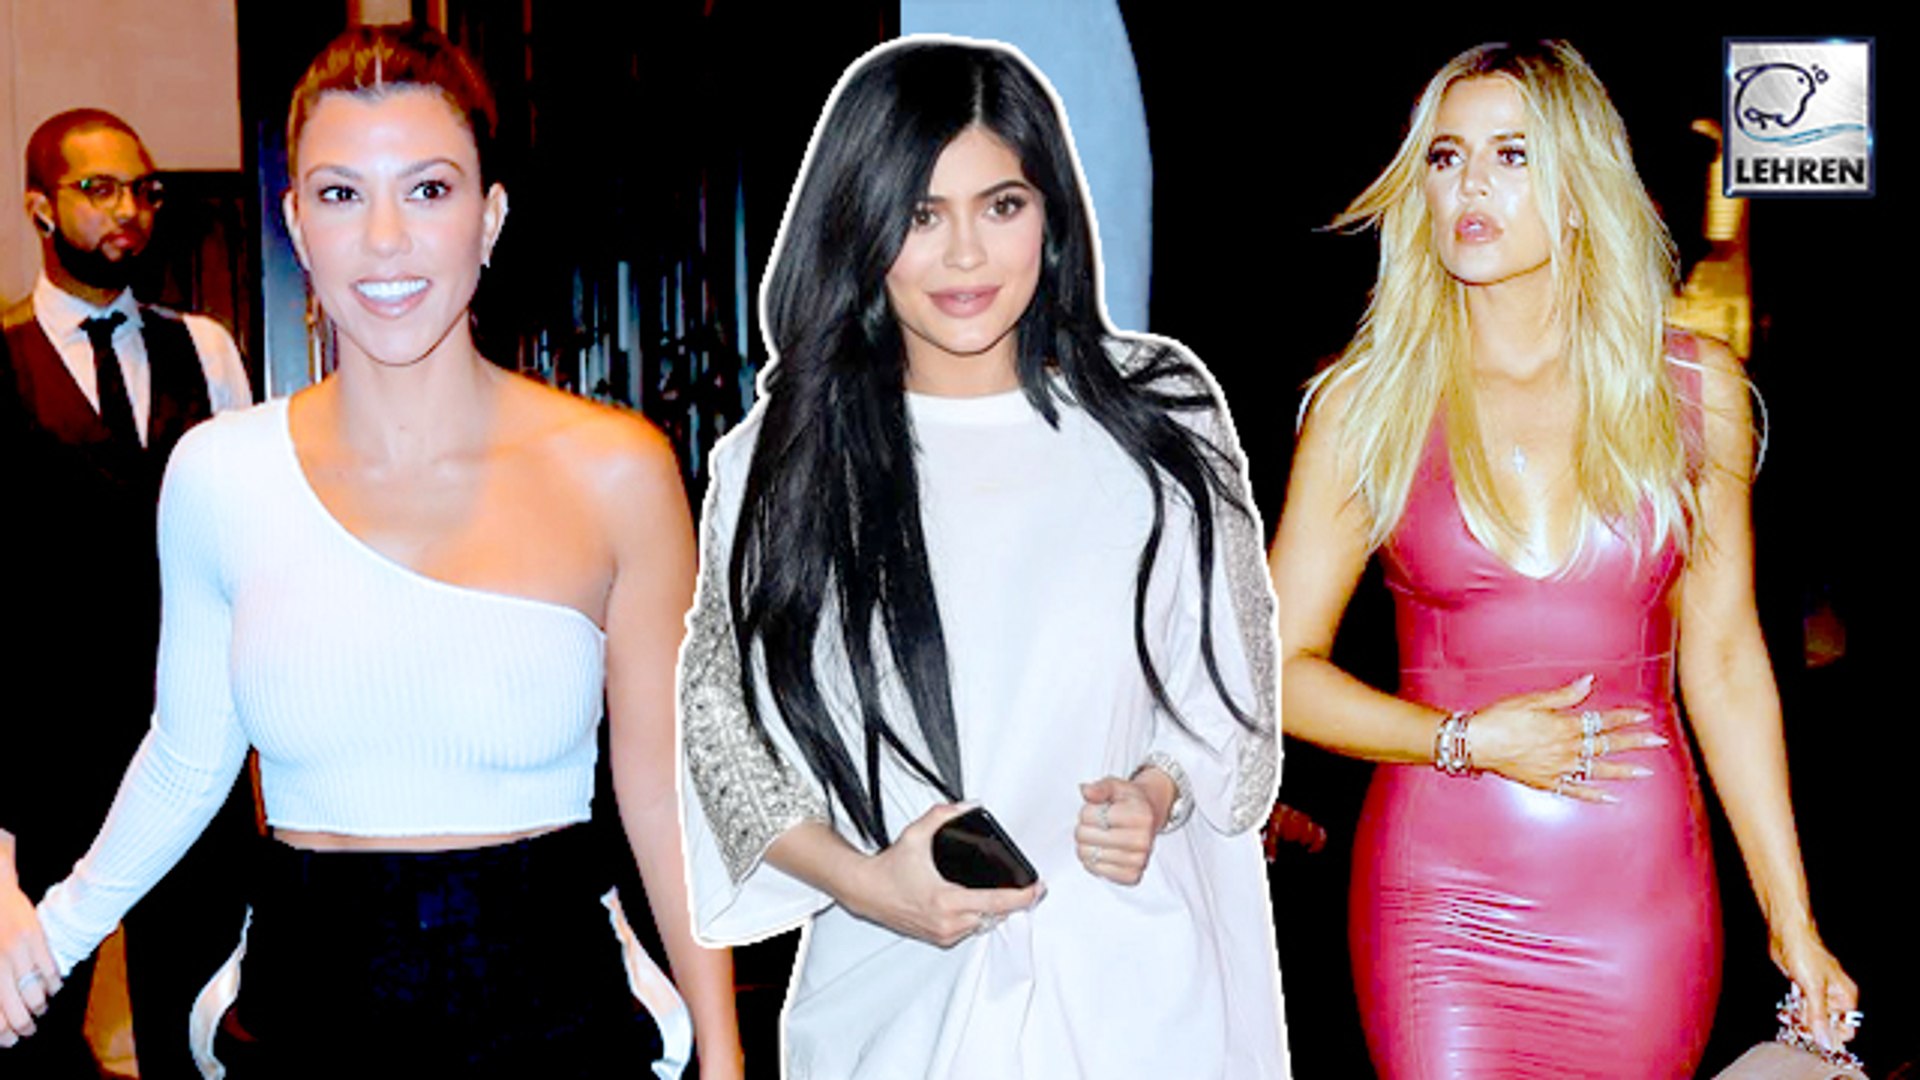 Kylie Jenner Takes Co-parenting Tips From Sisters Khloe & Kourtney